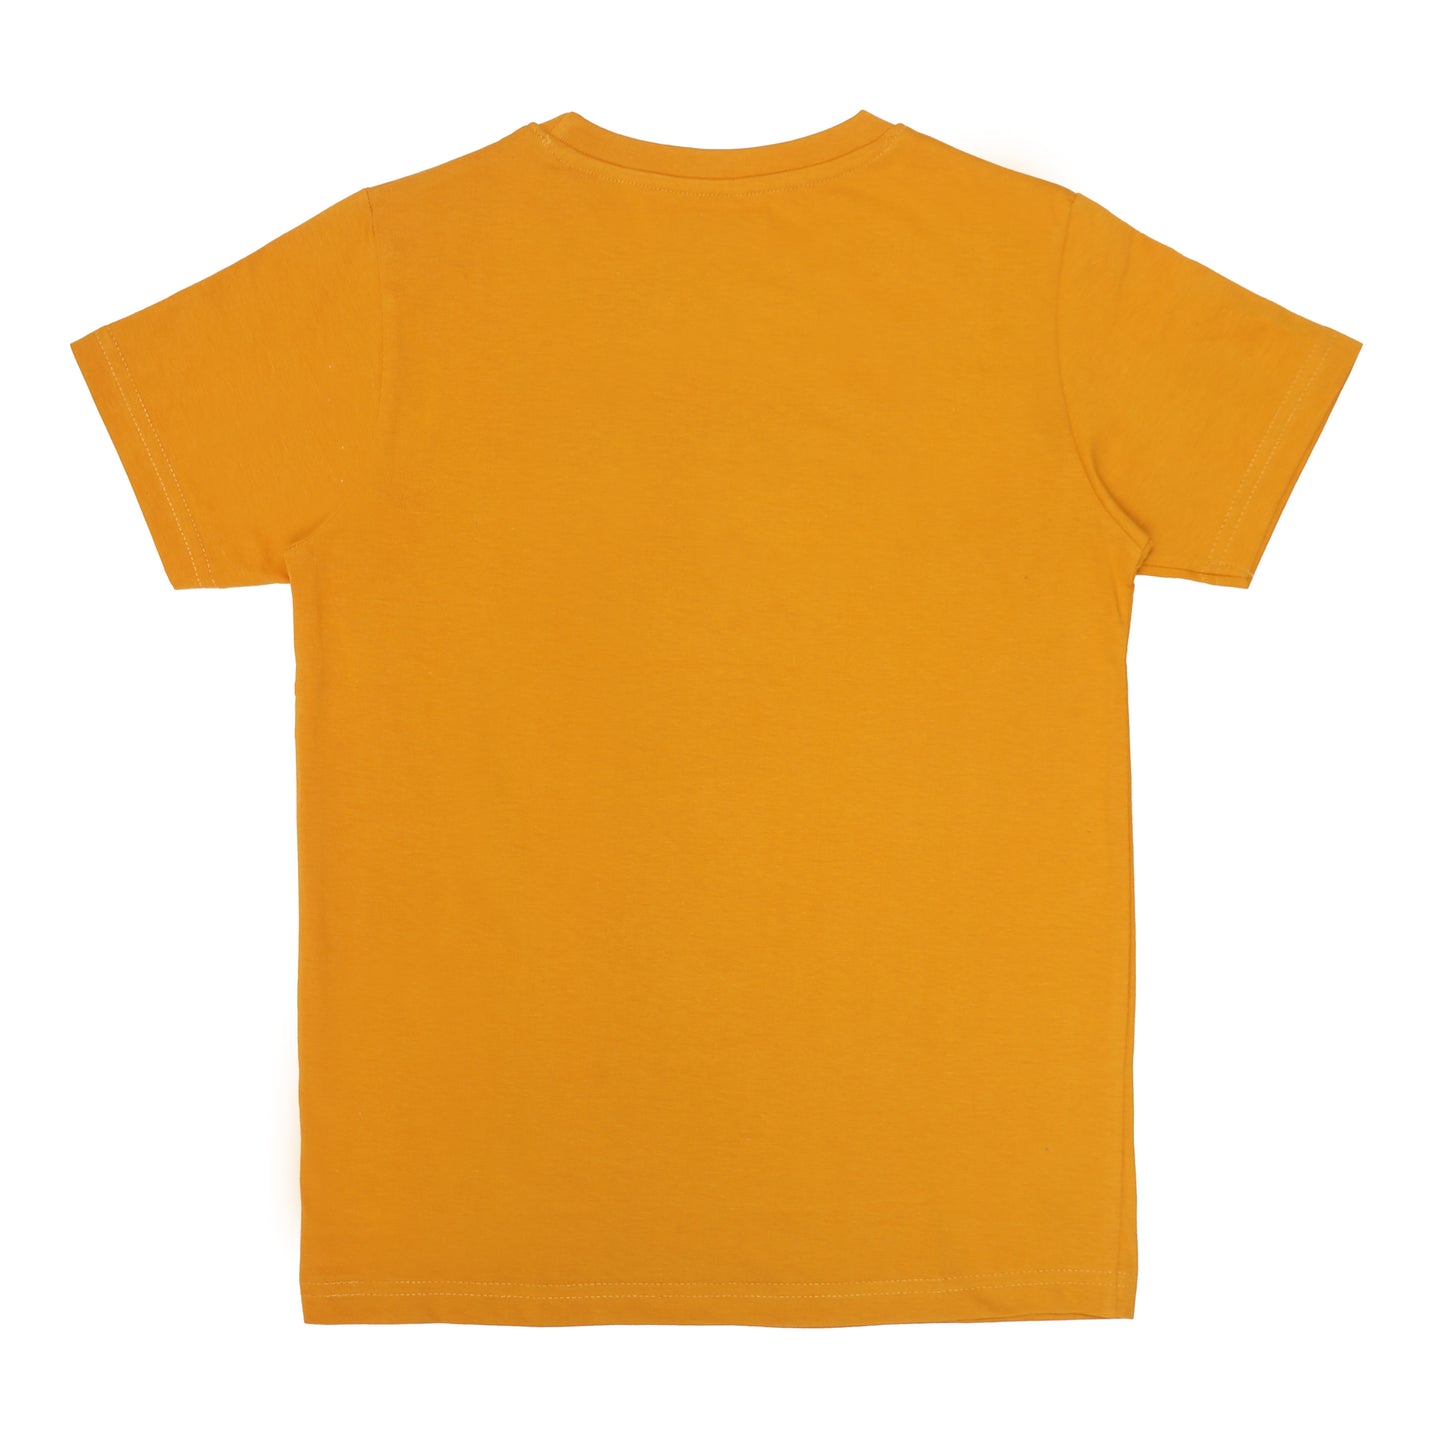 Round Neck Printed Cotton Tshirt, Color- Golden Yellow